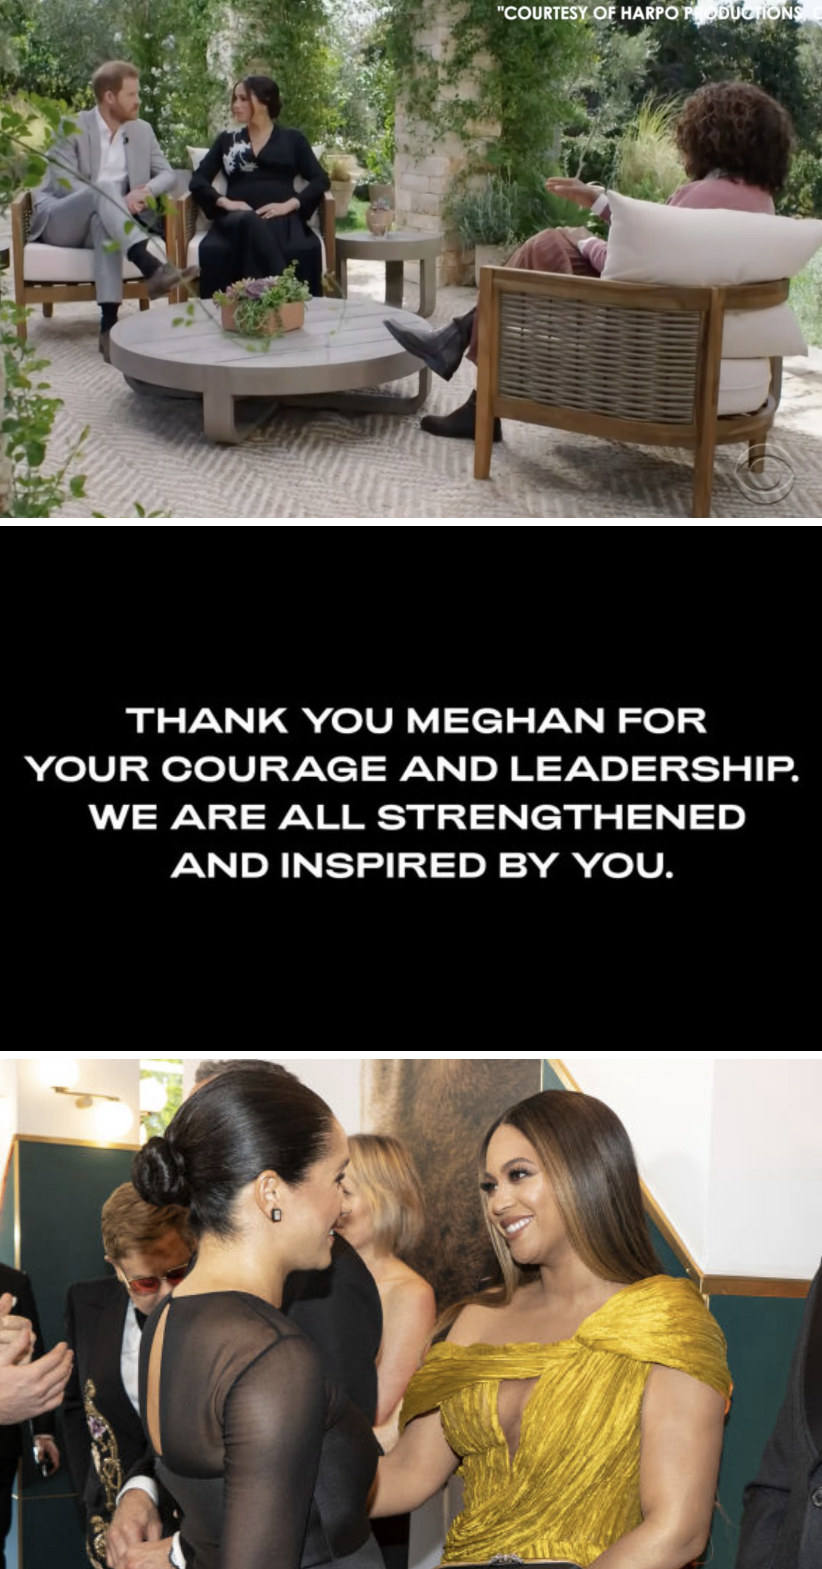 Prince Harry and Meghan Markle being interviewed by Oprah; Beyoncé&#x27;s message to Markle: &quot;Thank you Meghan for your courage and leadership. We are all strengthened and inspired by you;&quot; Markle and Beyoncé at the 2019 premiere of &quot;The Lion King&quot;